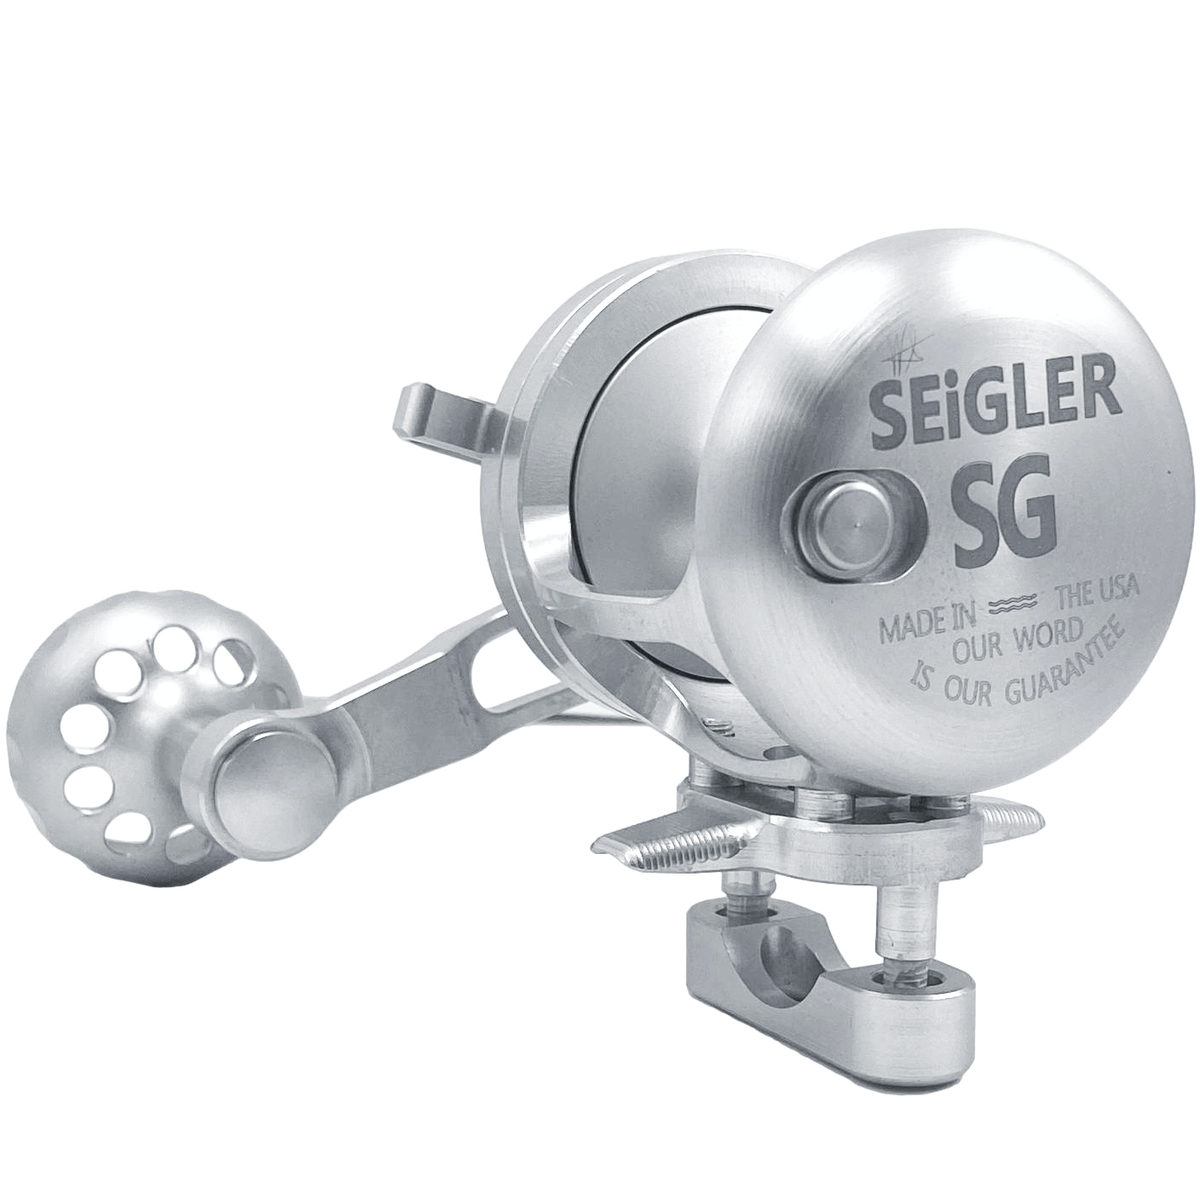 Seigler SG (Small Game) Conventional Lever Drag Reels Left Hand / Silver / Silver